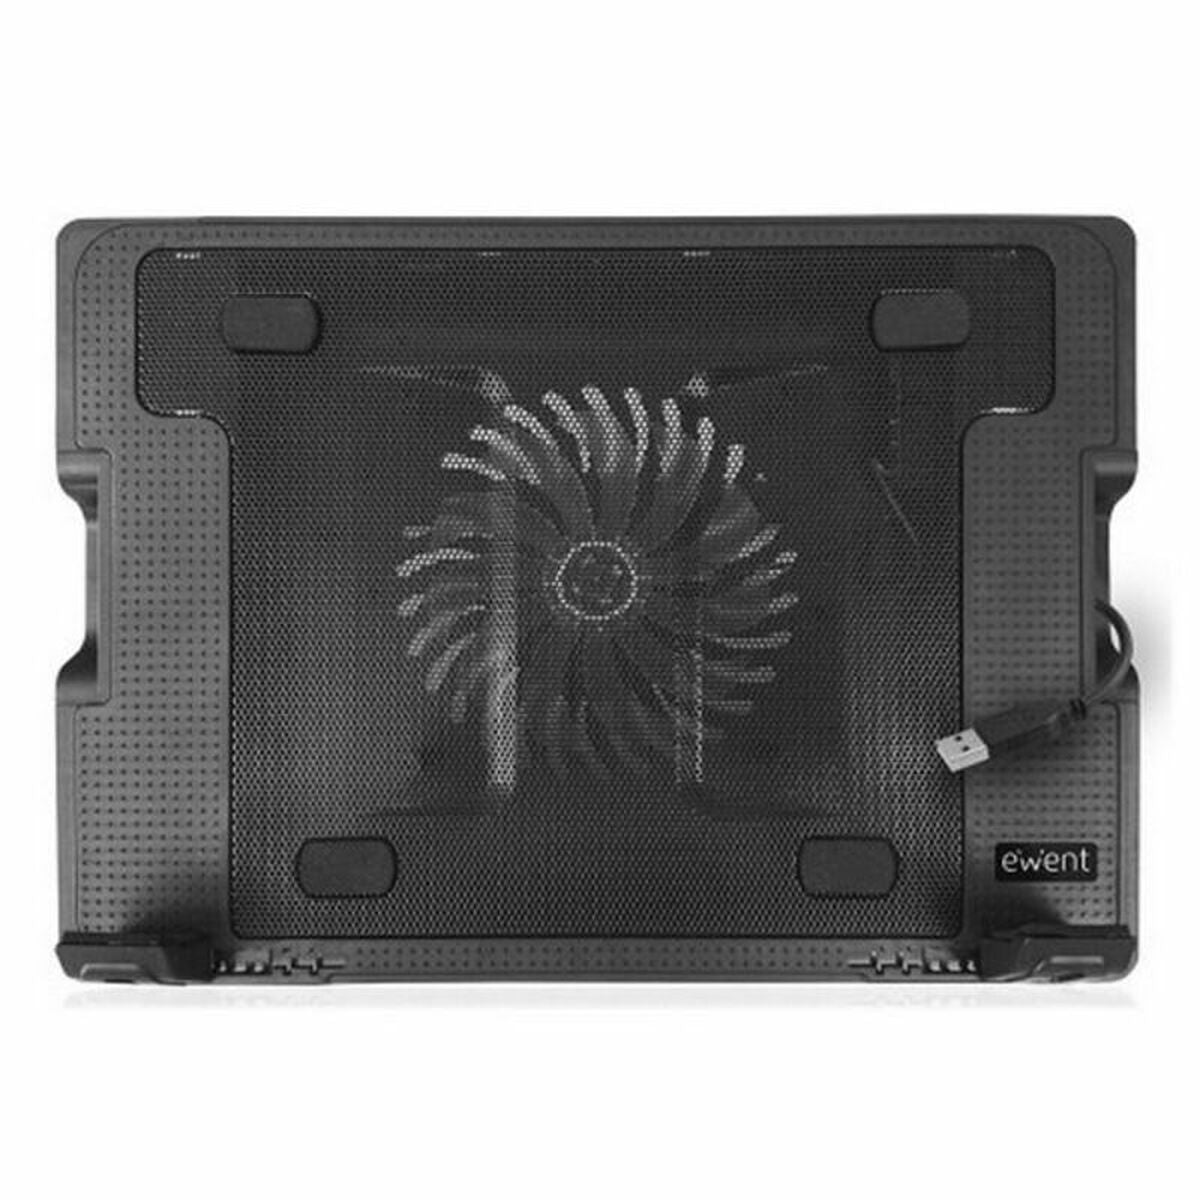 Cooling Base for a Laptop Ewent EW1258 17" Black